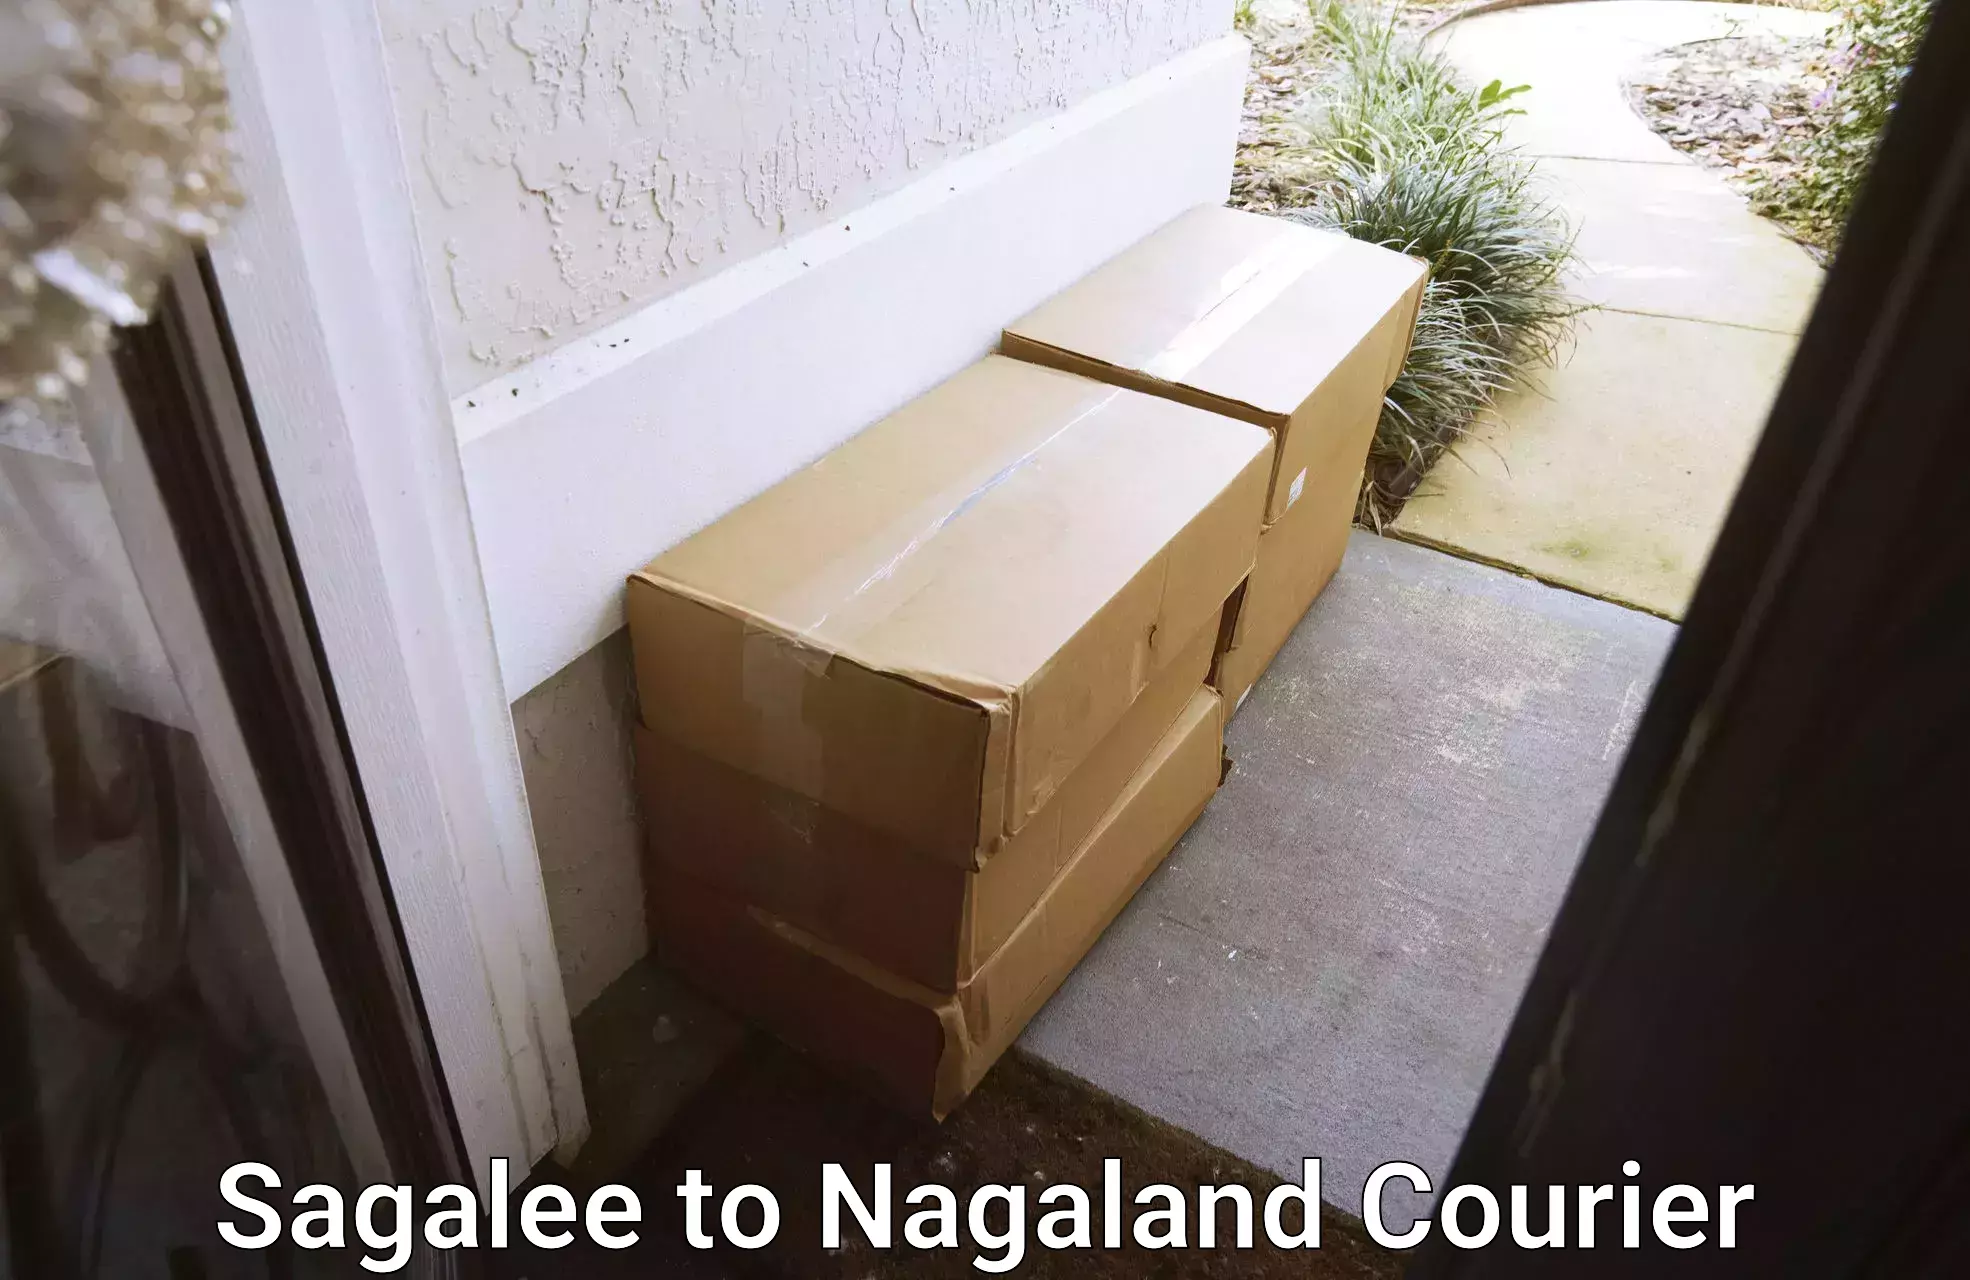 User-friendly delivery service Sagalee to Nagaland